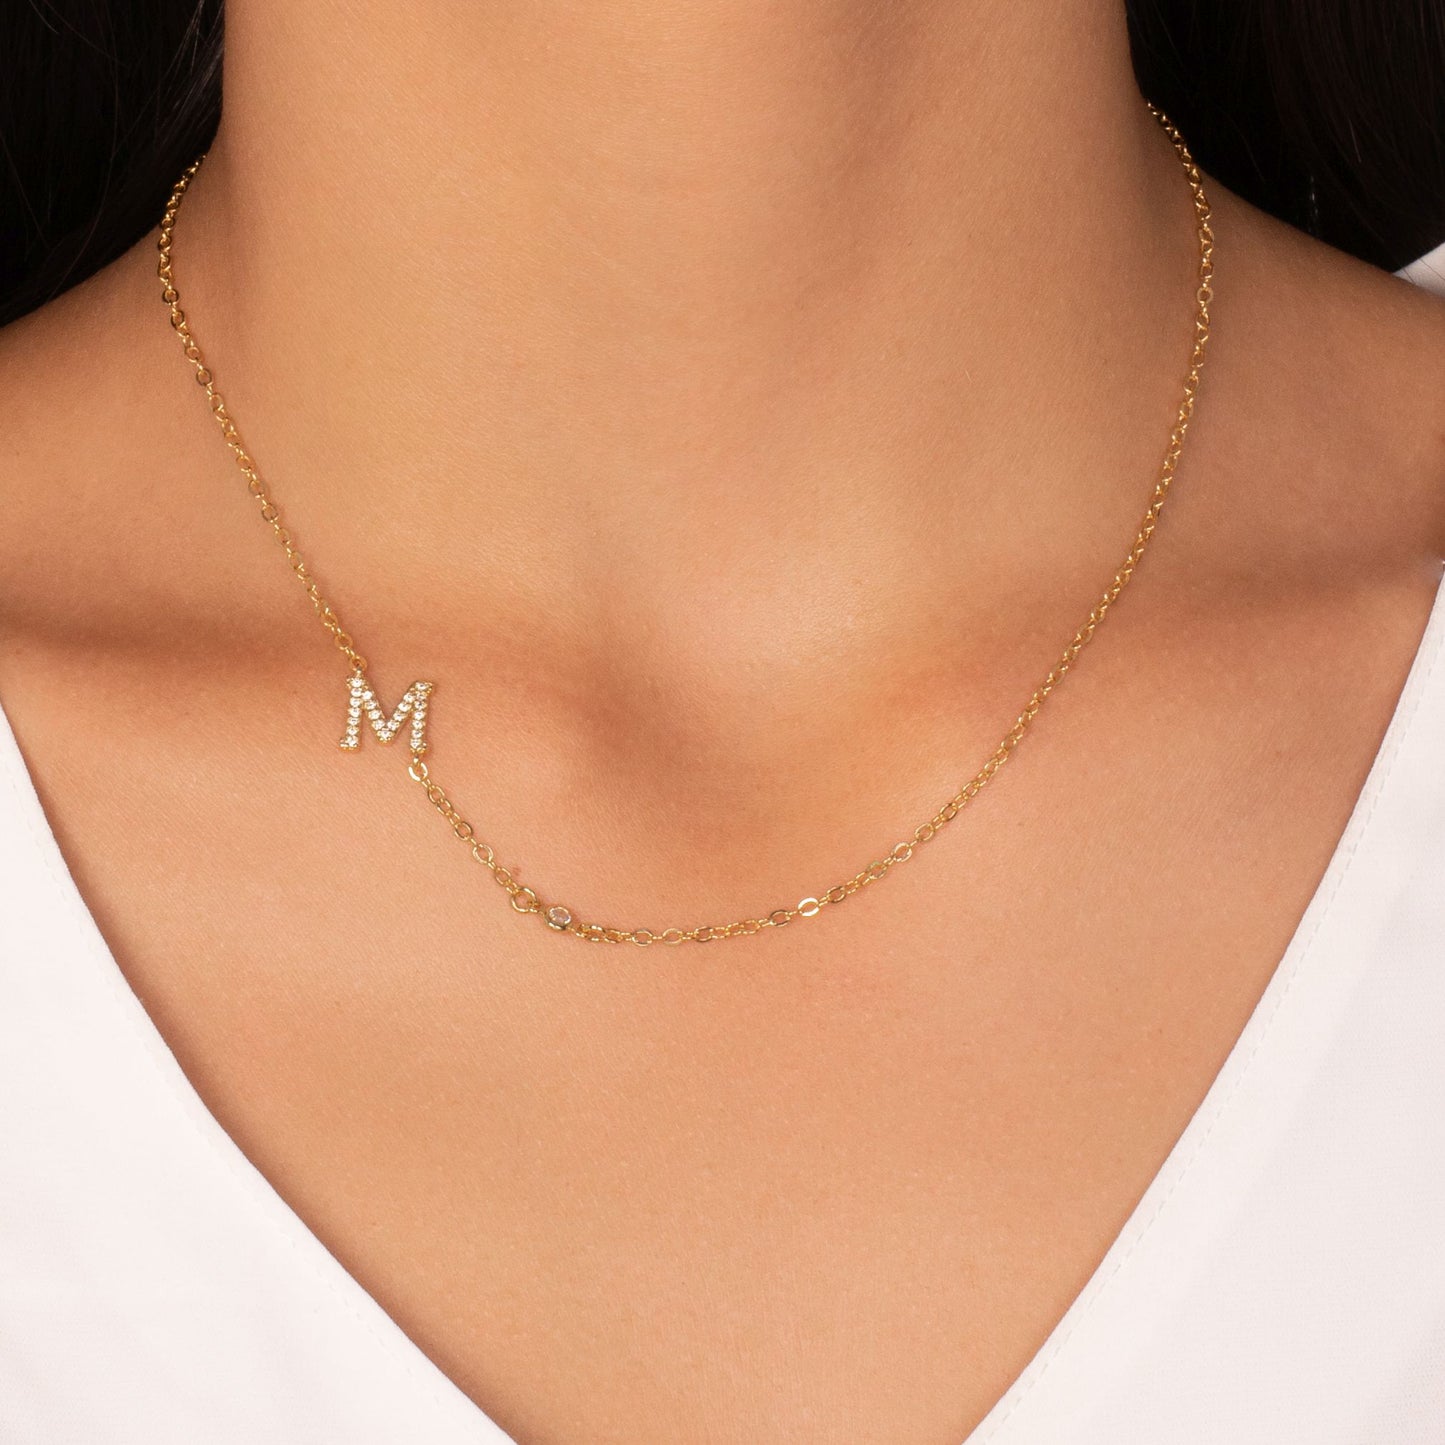 Necklace with first letter of name